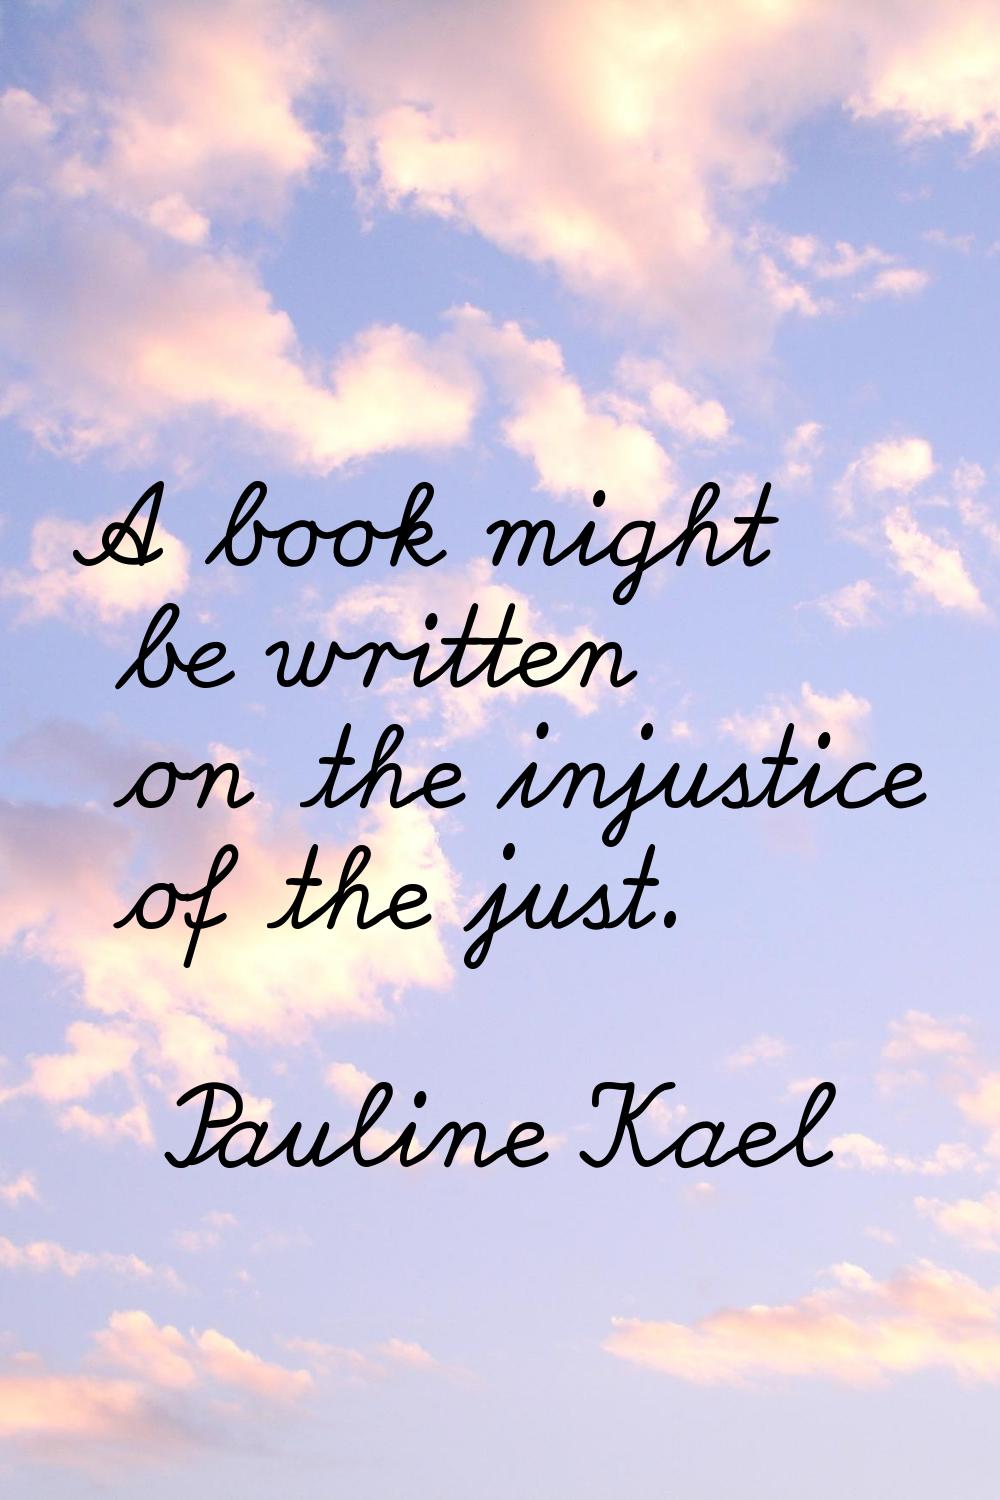 A book might be written on the injustice of the just.